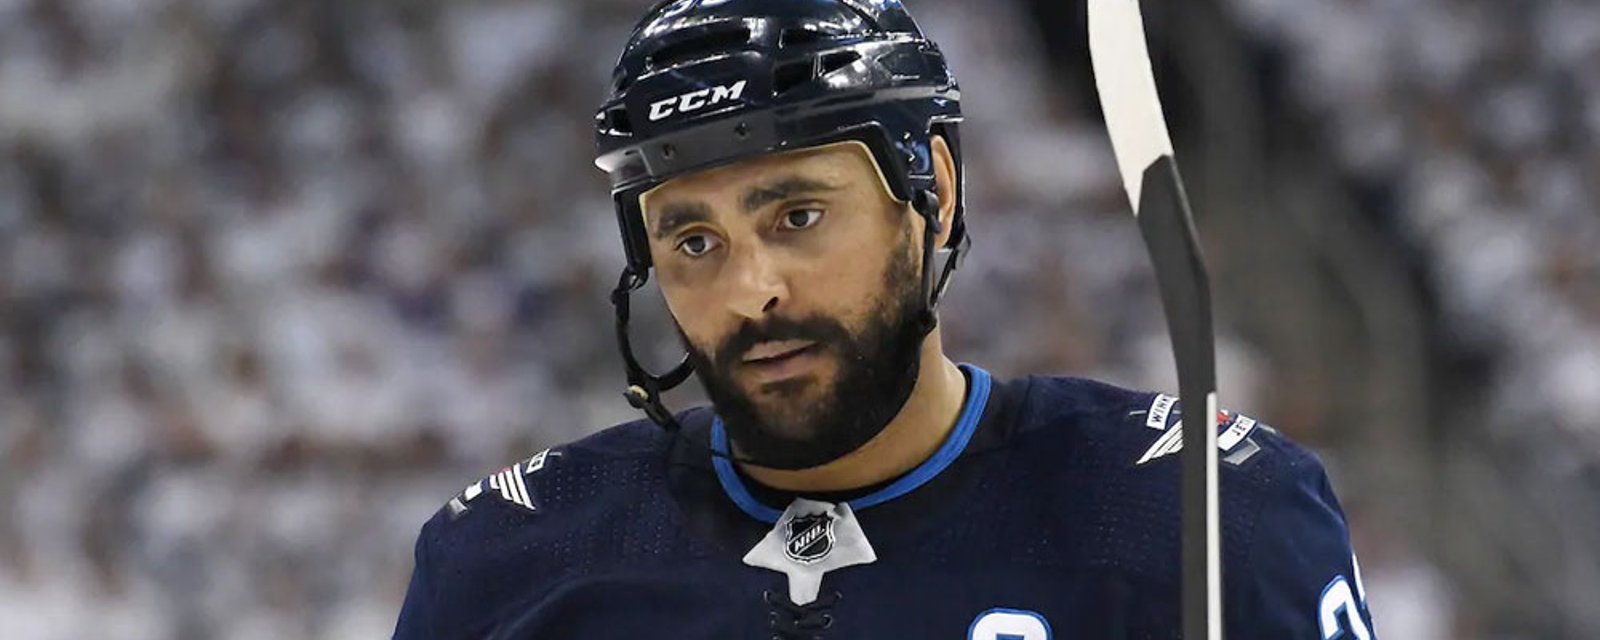 Report: It’s all over between Byfuglien and the Winnipeg Jets